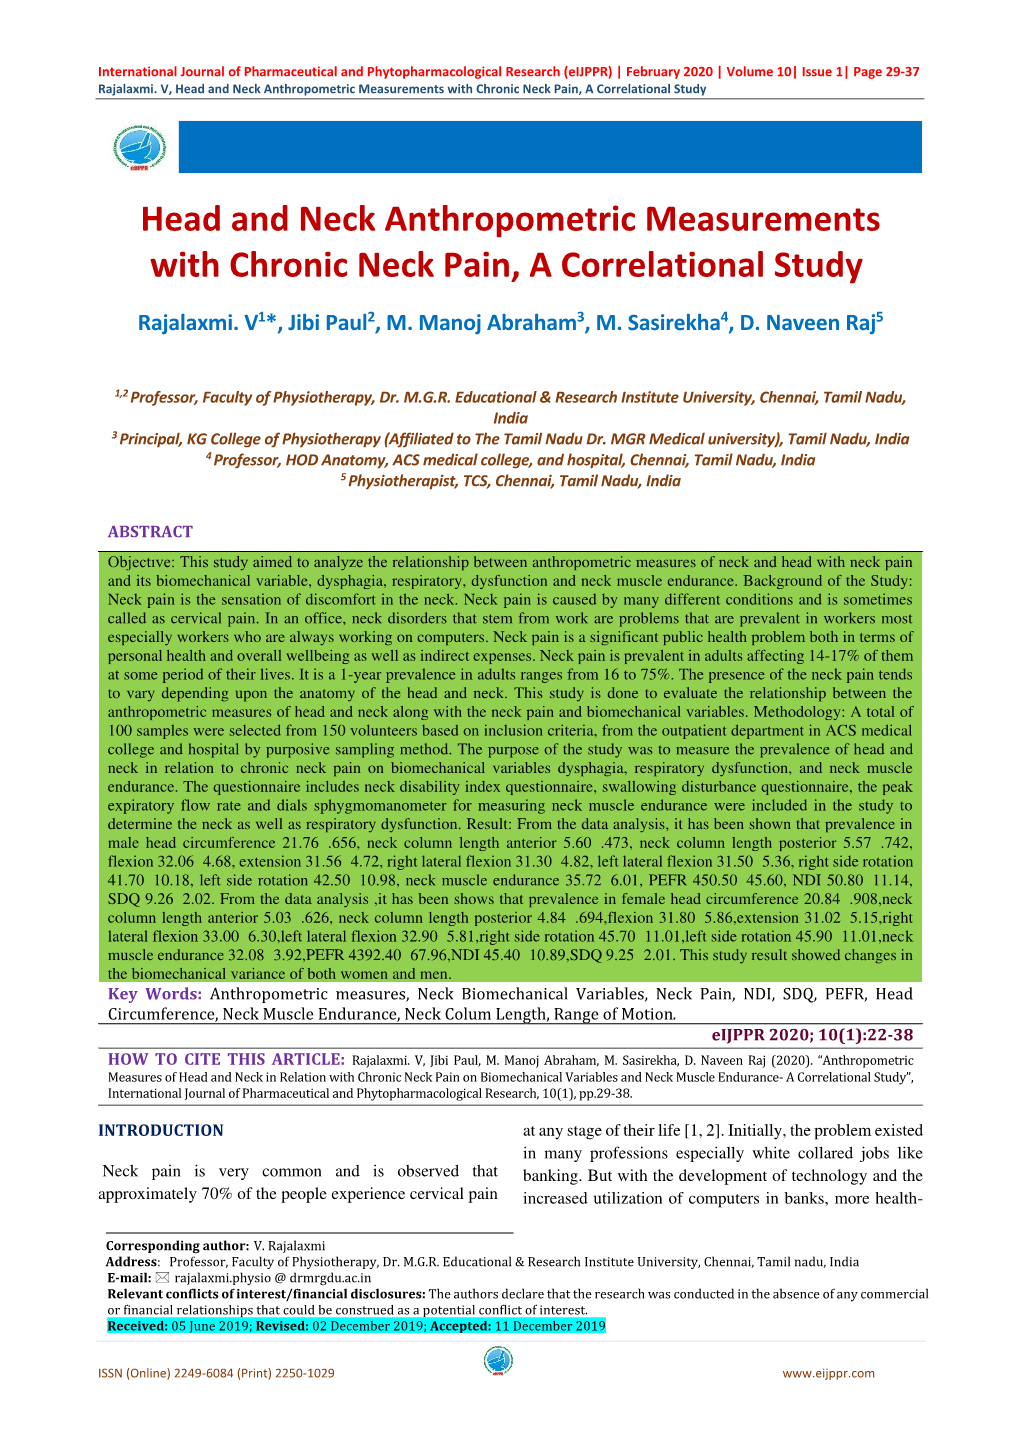 Head and Neck Anthropometric Measurements with Chronic Neck Pain, a Correlational Study